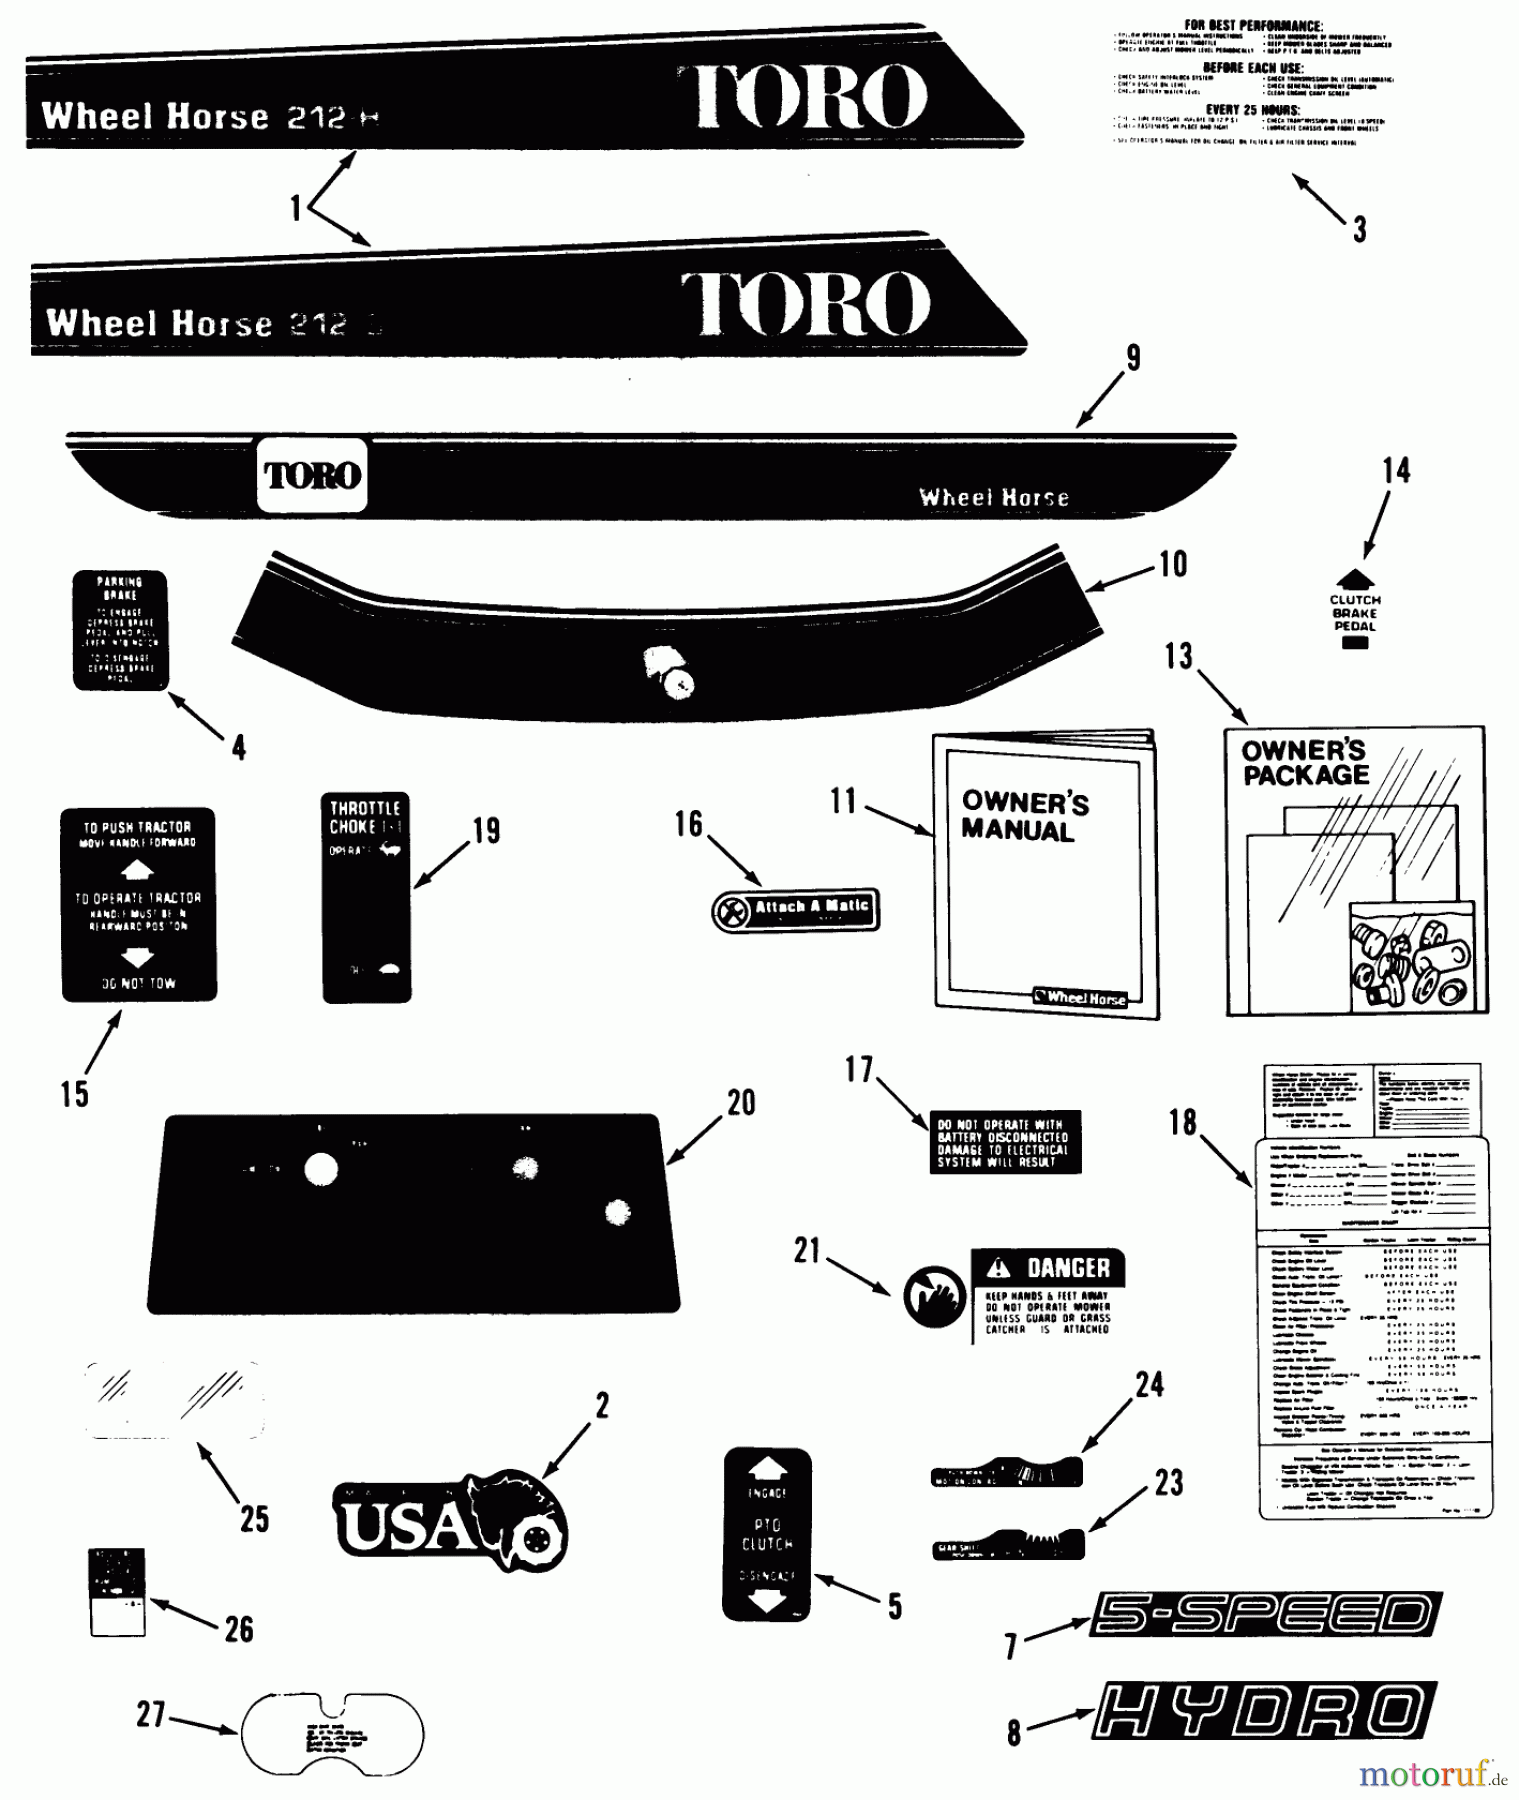  Toro Neu Mowers, Lawn & Garden Tractor Seite 1 32-12B5A2 (212-5) - Toro 212-5 Tractor, 1991 (1000001-1999999) DECAL & MISCELLANEOUS PARTS ASSEMBLY